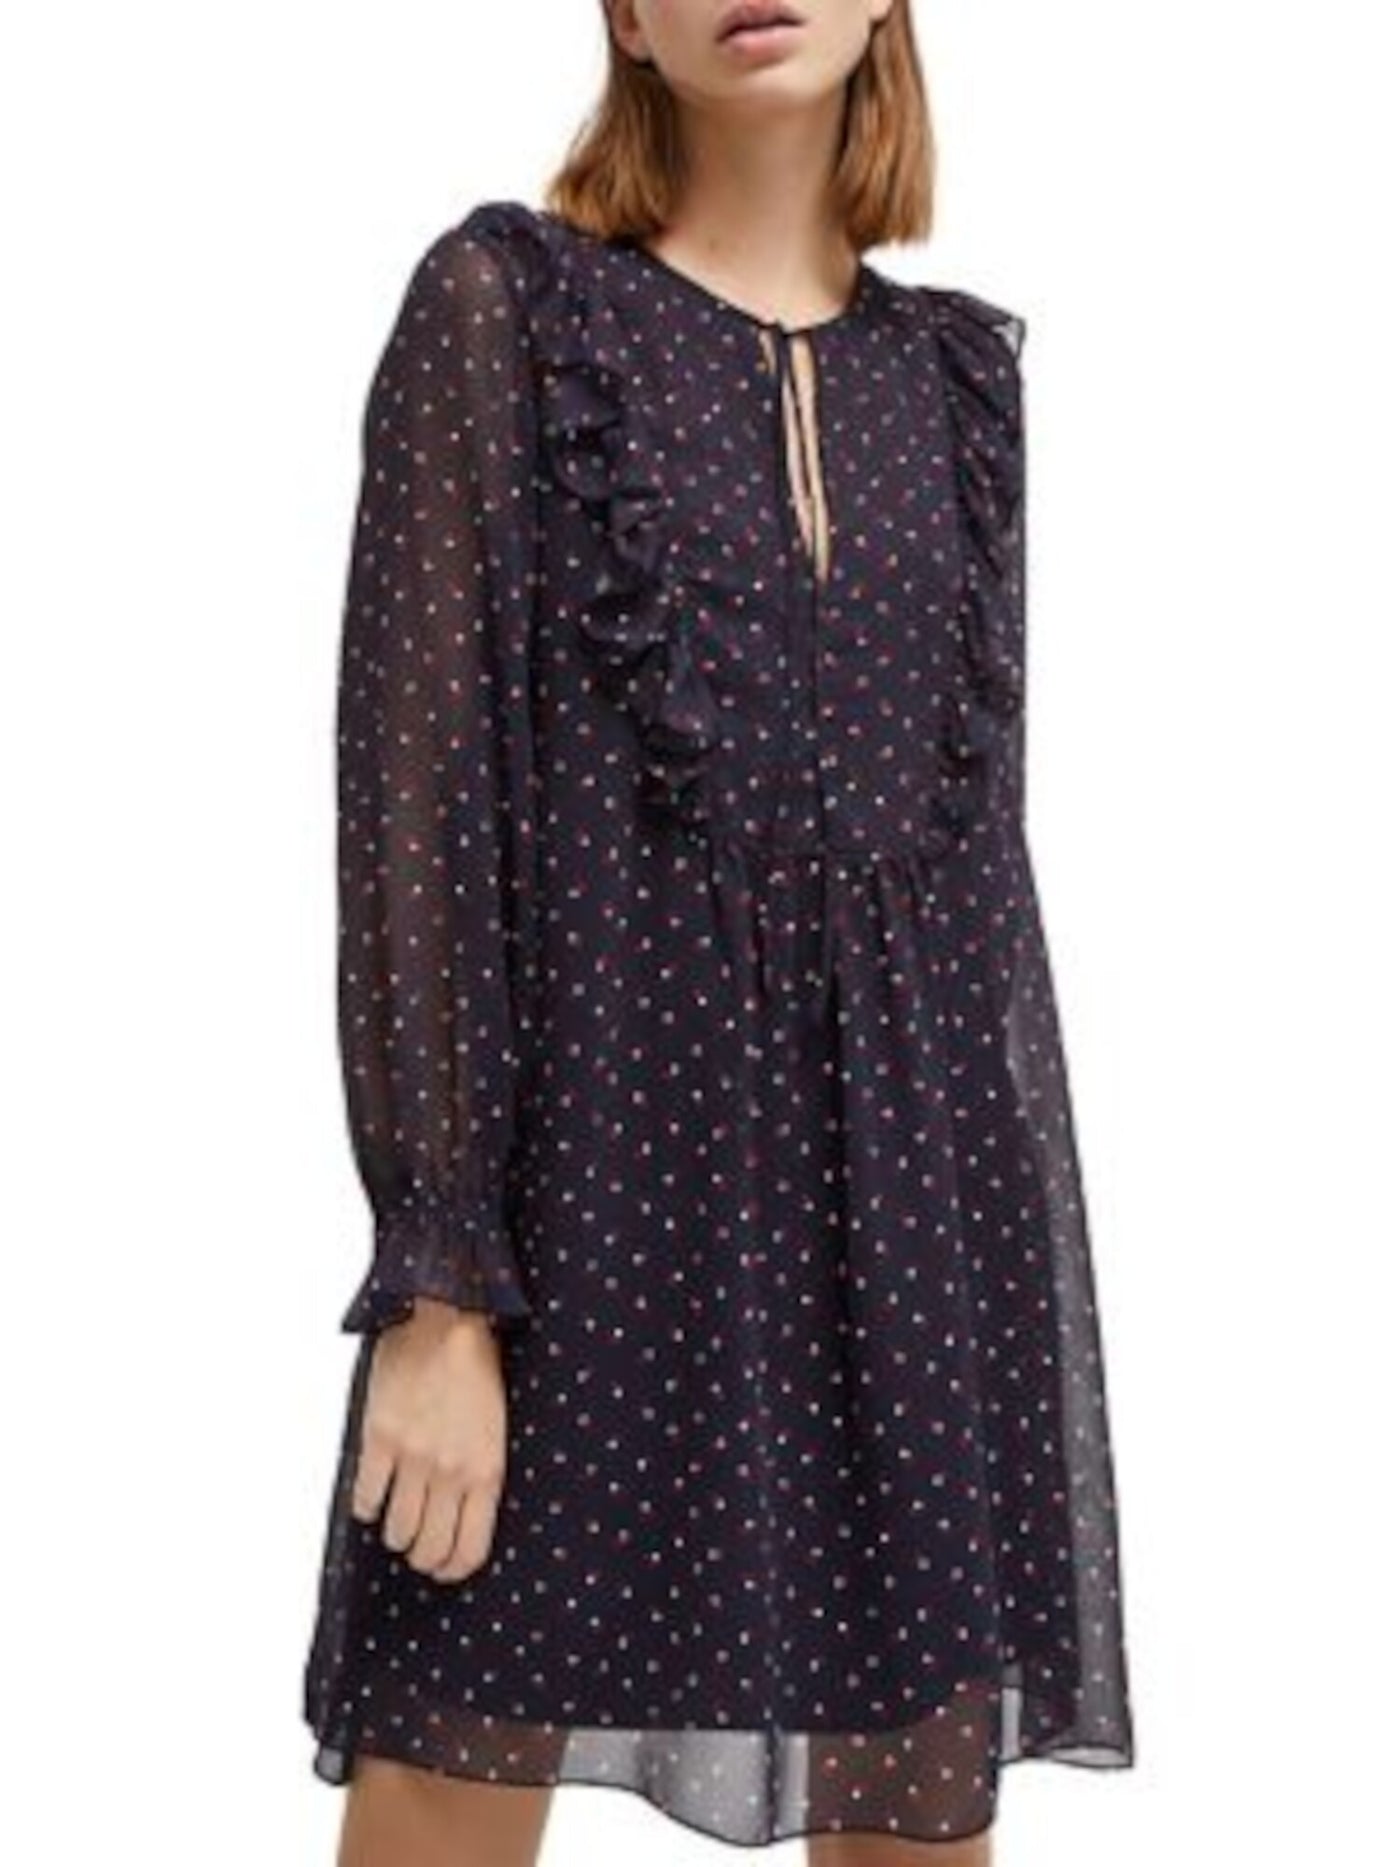 FRENCH CONNECTION Womens Navy Floral Long Sleeve Keyhole Short Sheath Dress 0